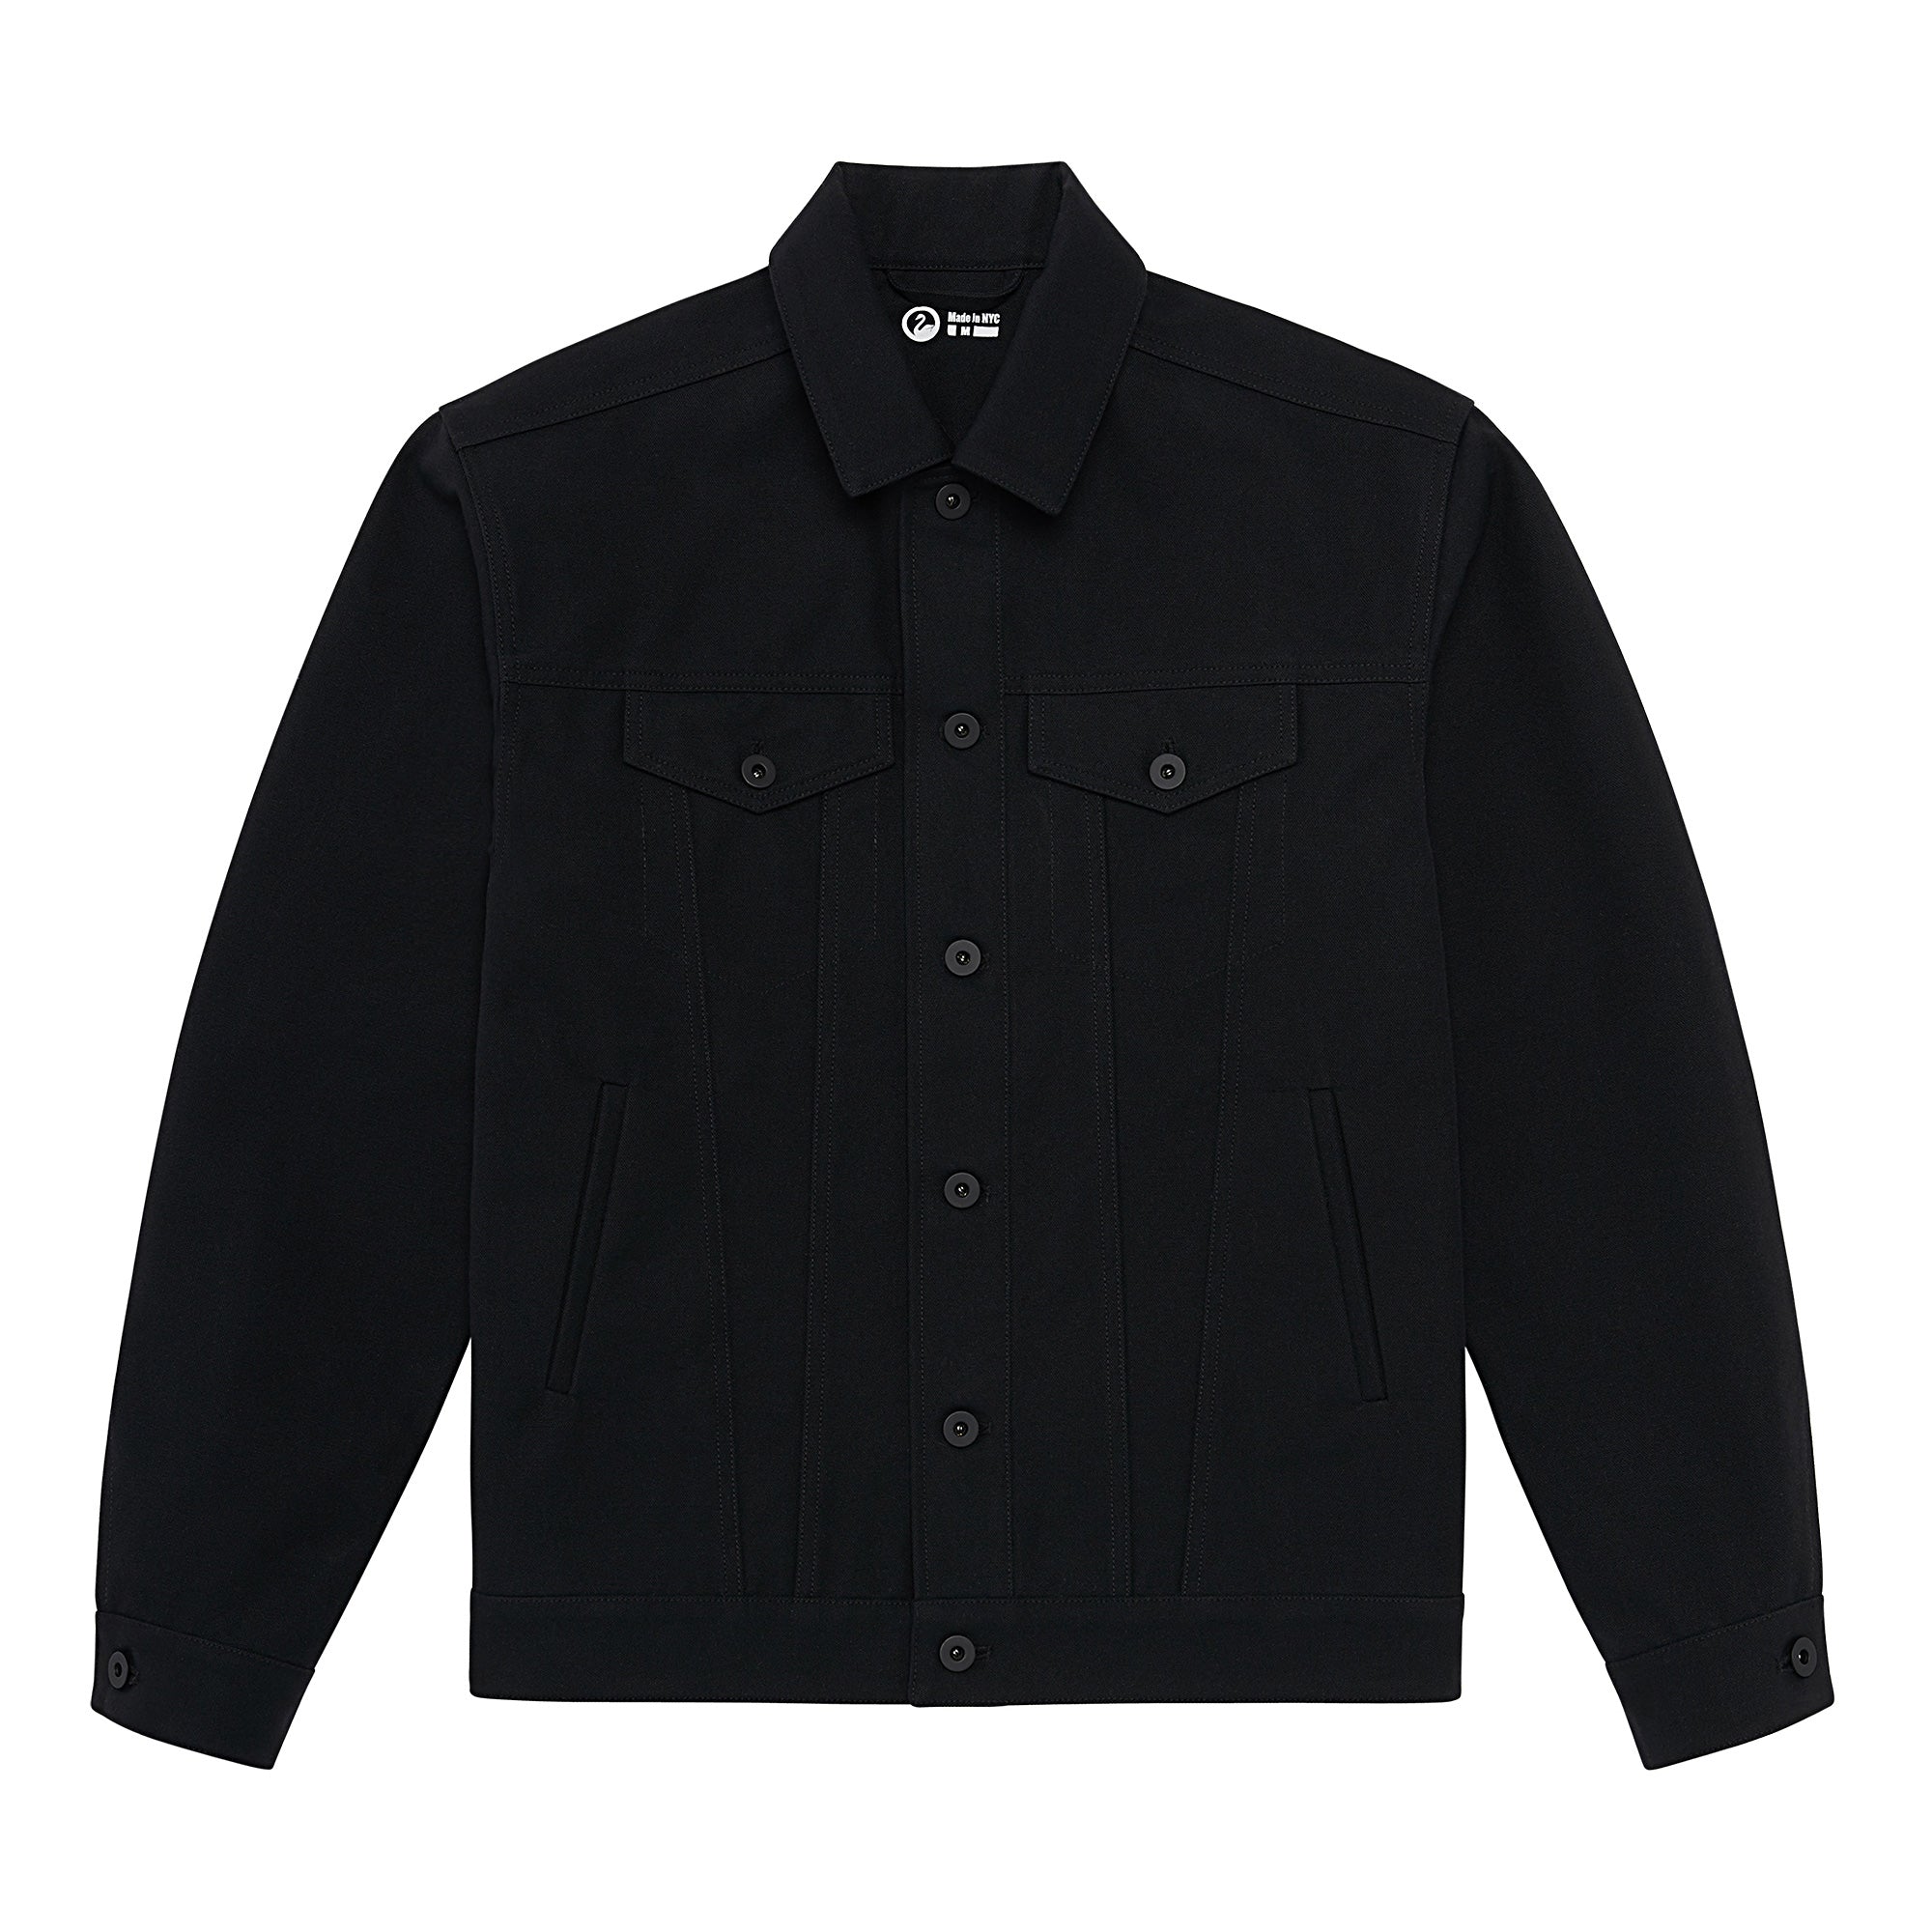 Full flat image of the Duckcloth Shank Jacket in Black